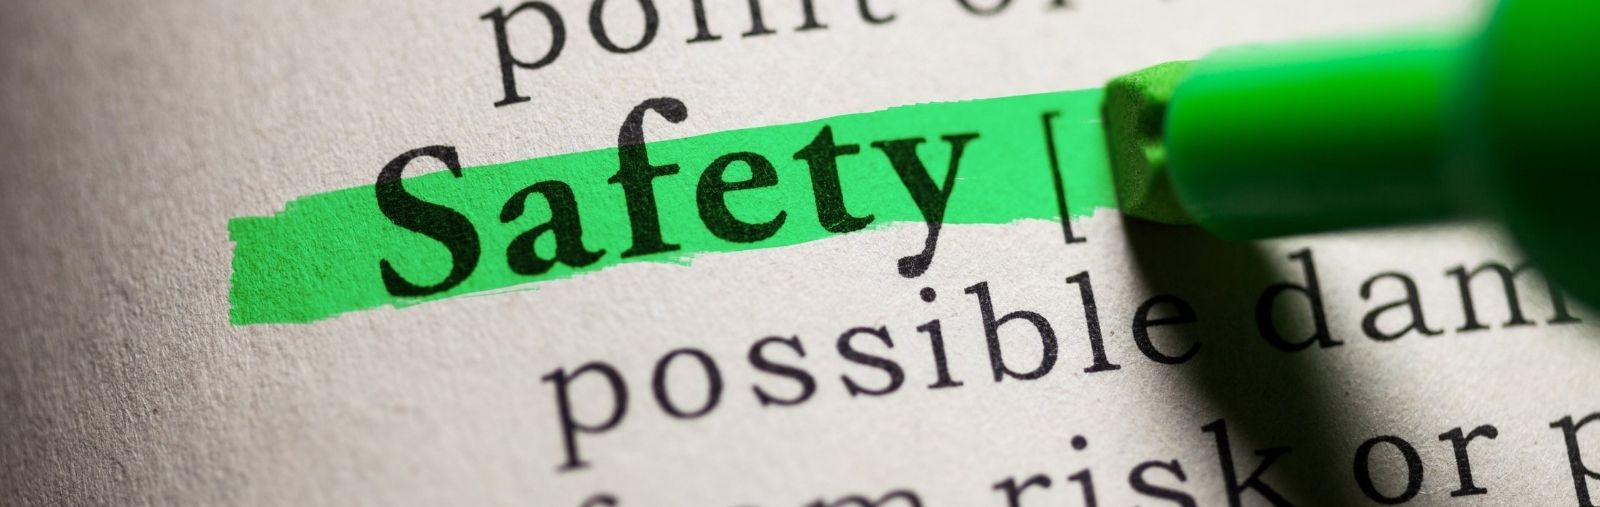 The word "Safety" highlighted in green on a page